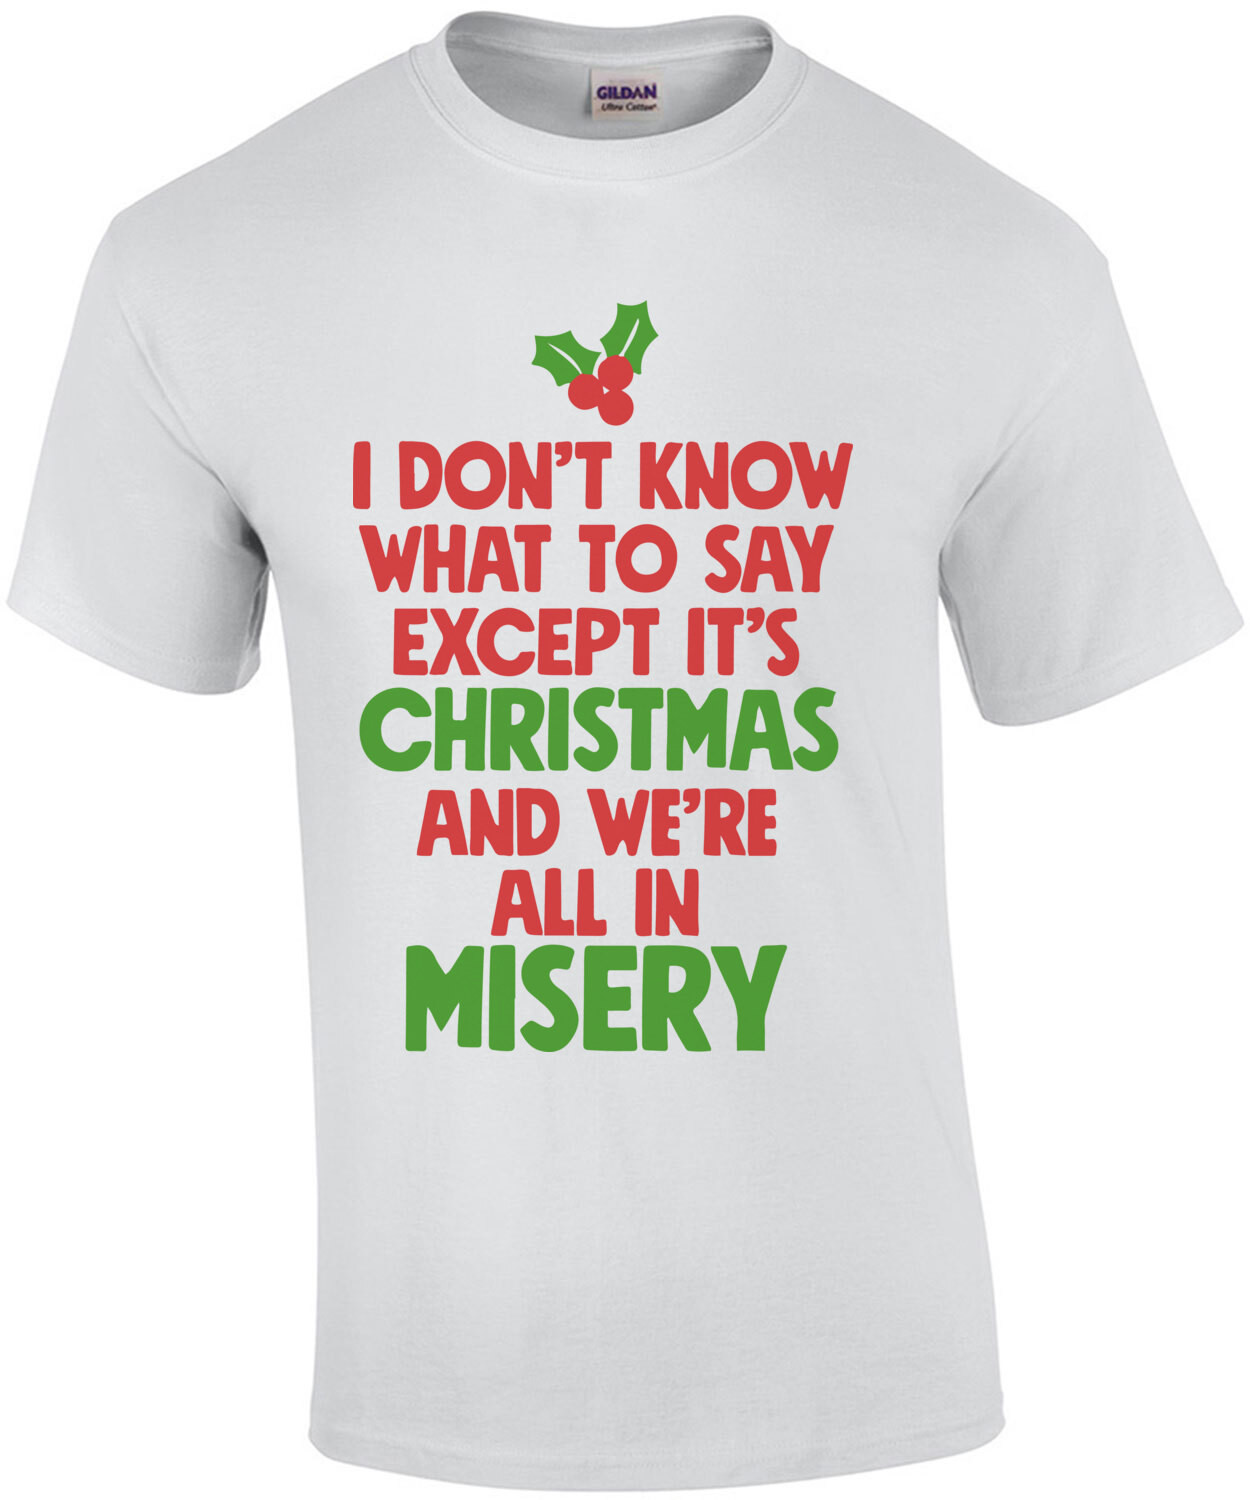 I don't know what to say except it's Christmas and we're all in misery - Christmas Vacation T-Shirt